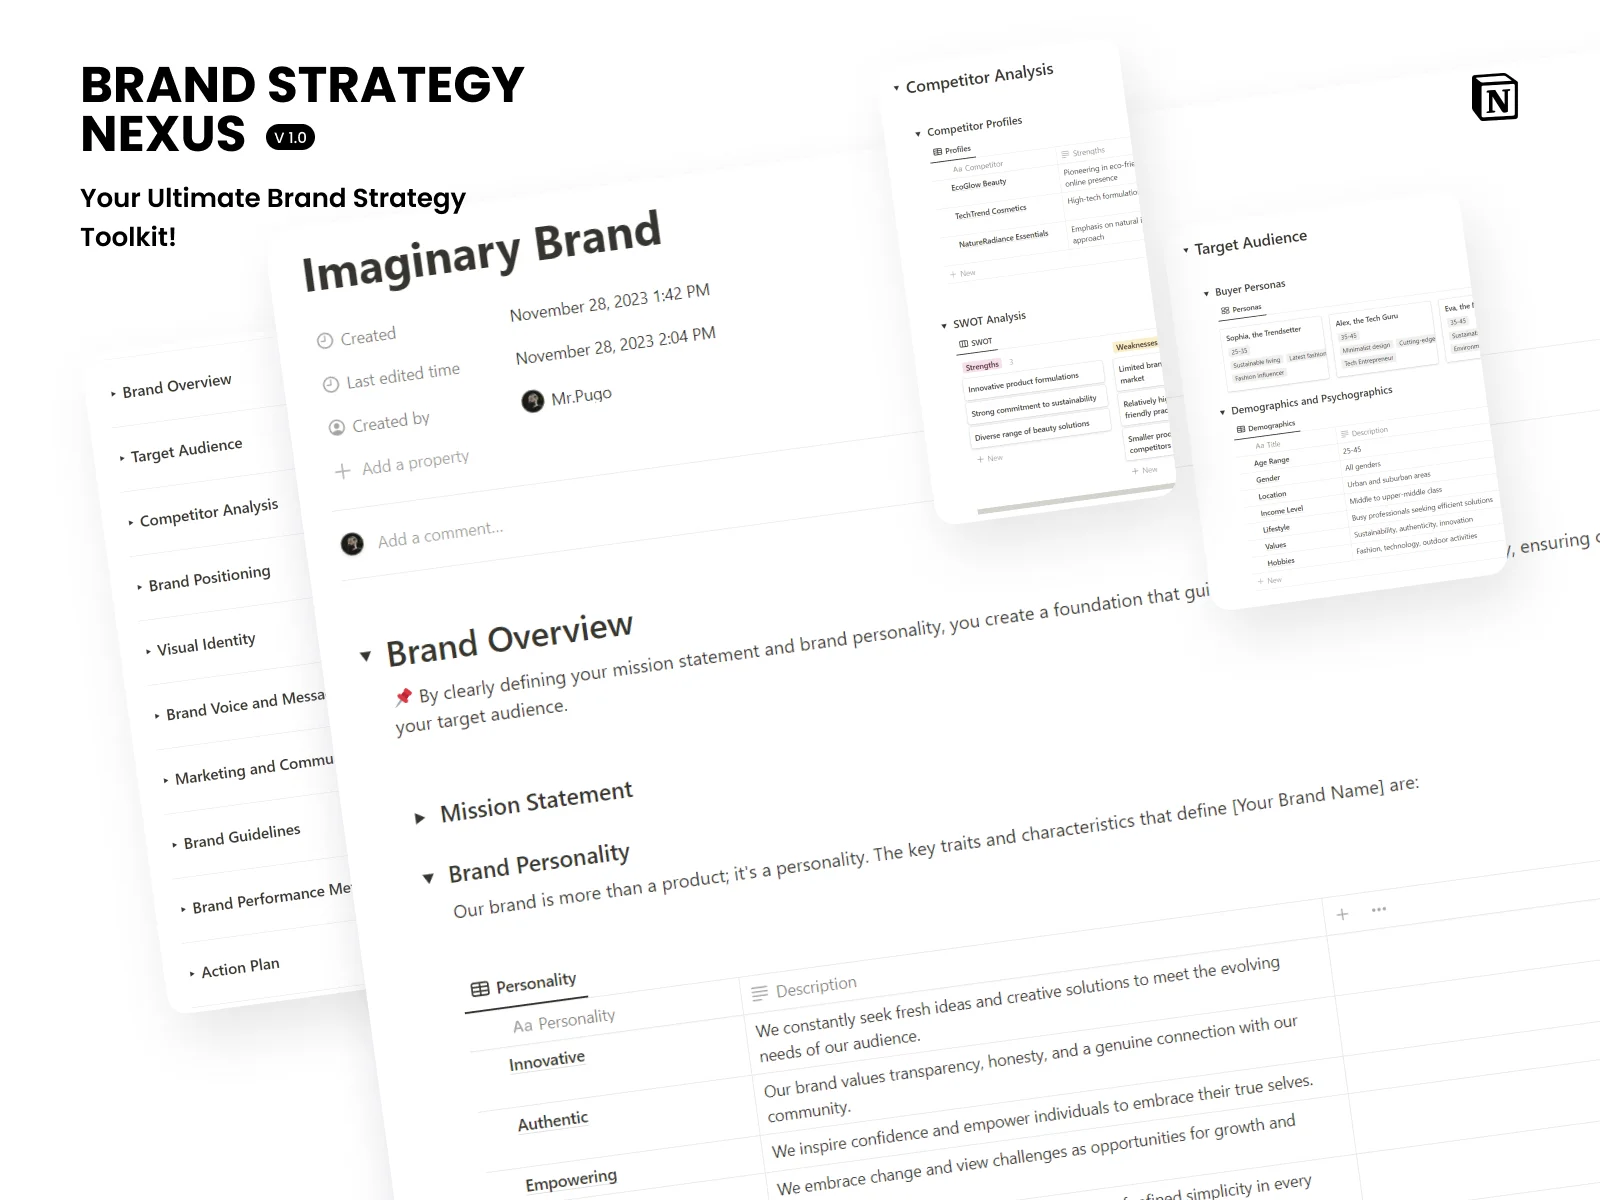 Your Ultimate Brand Strategy Toolkit!